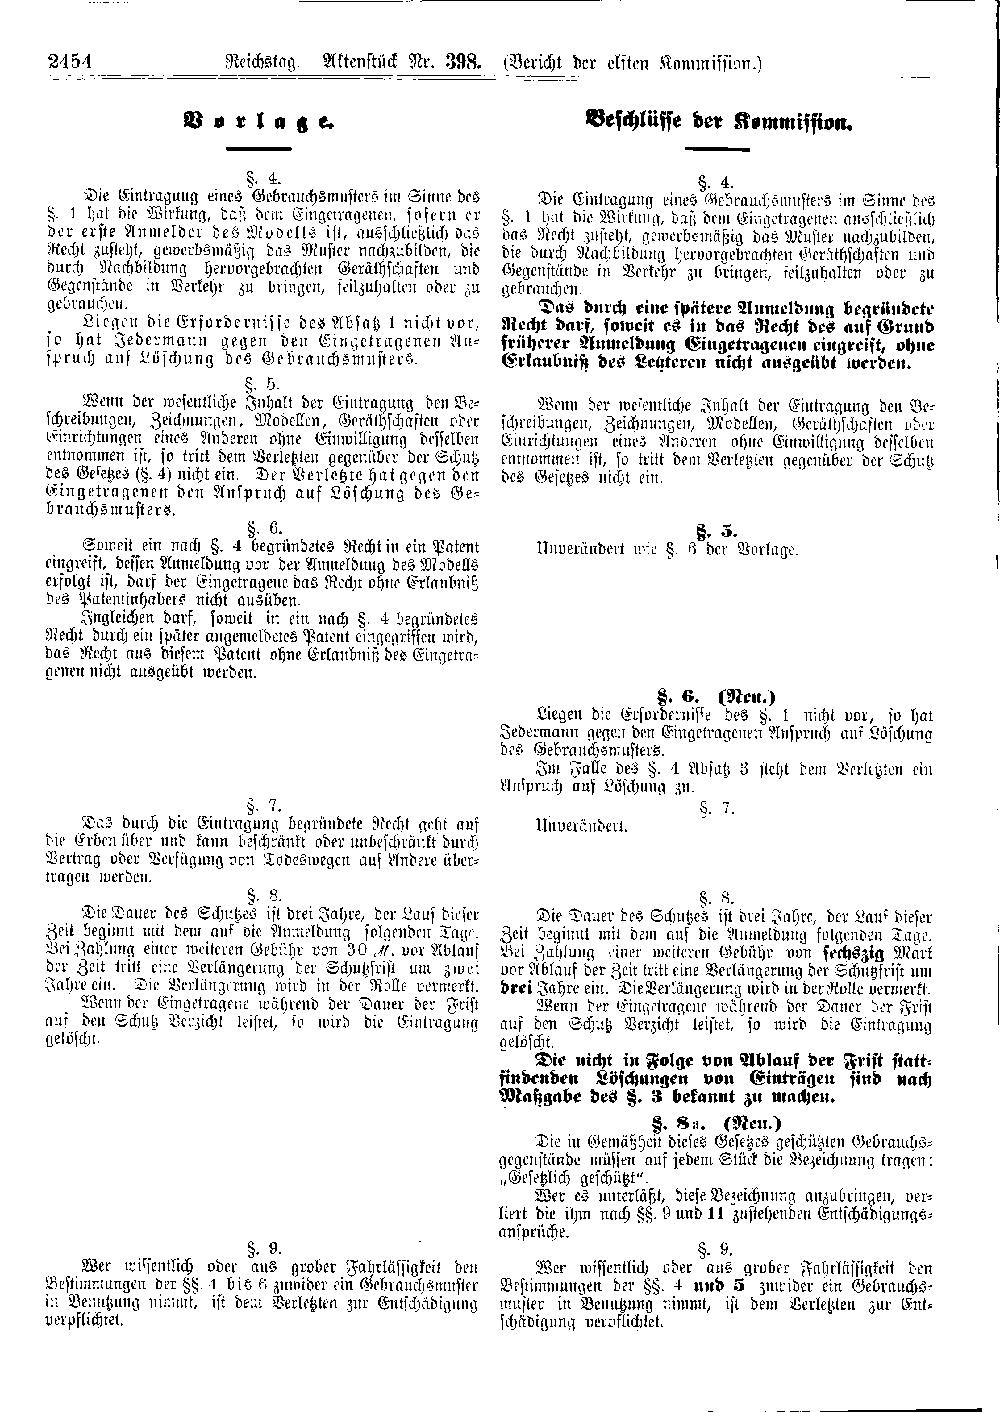 Scan of page 2454